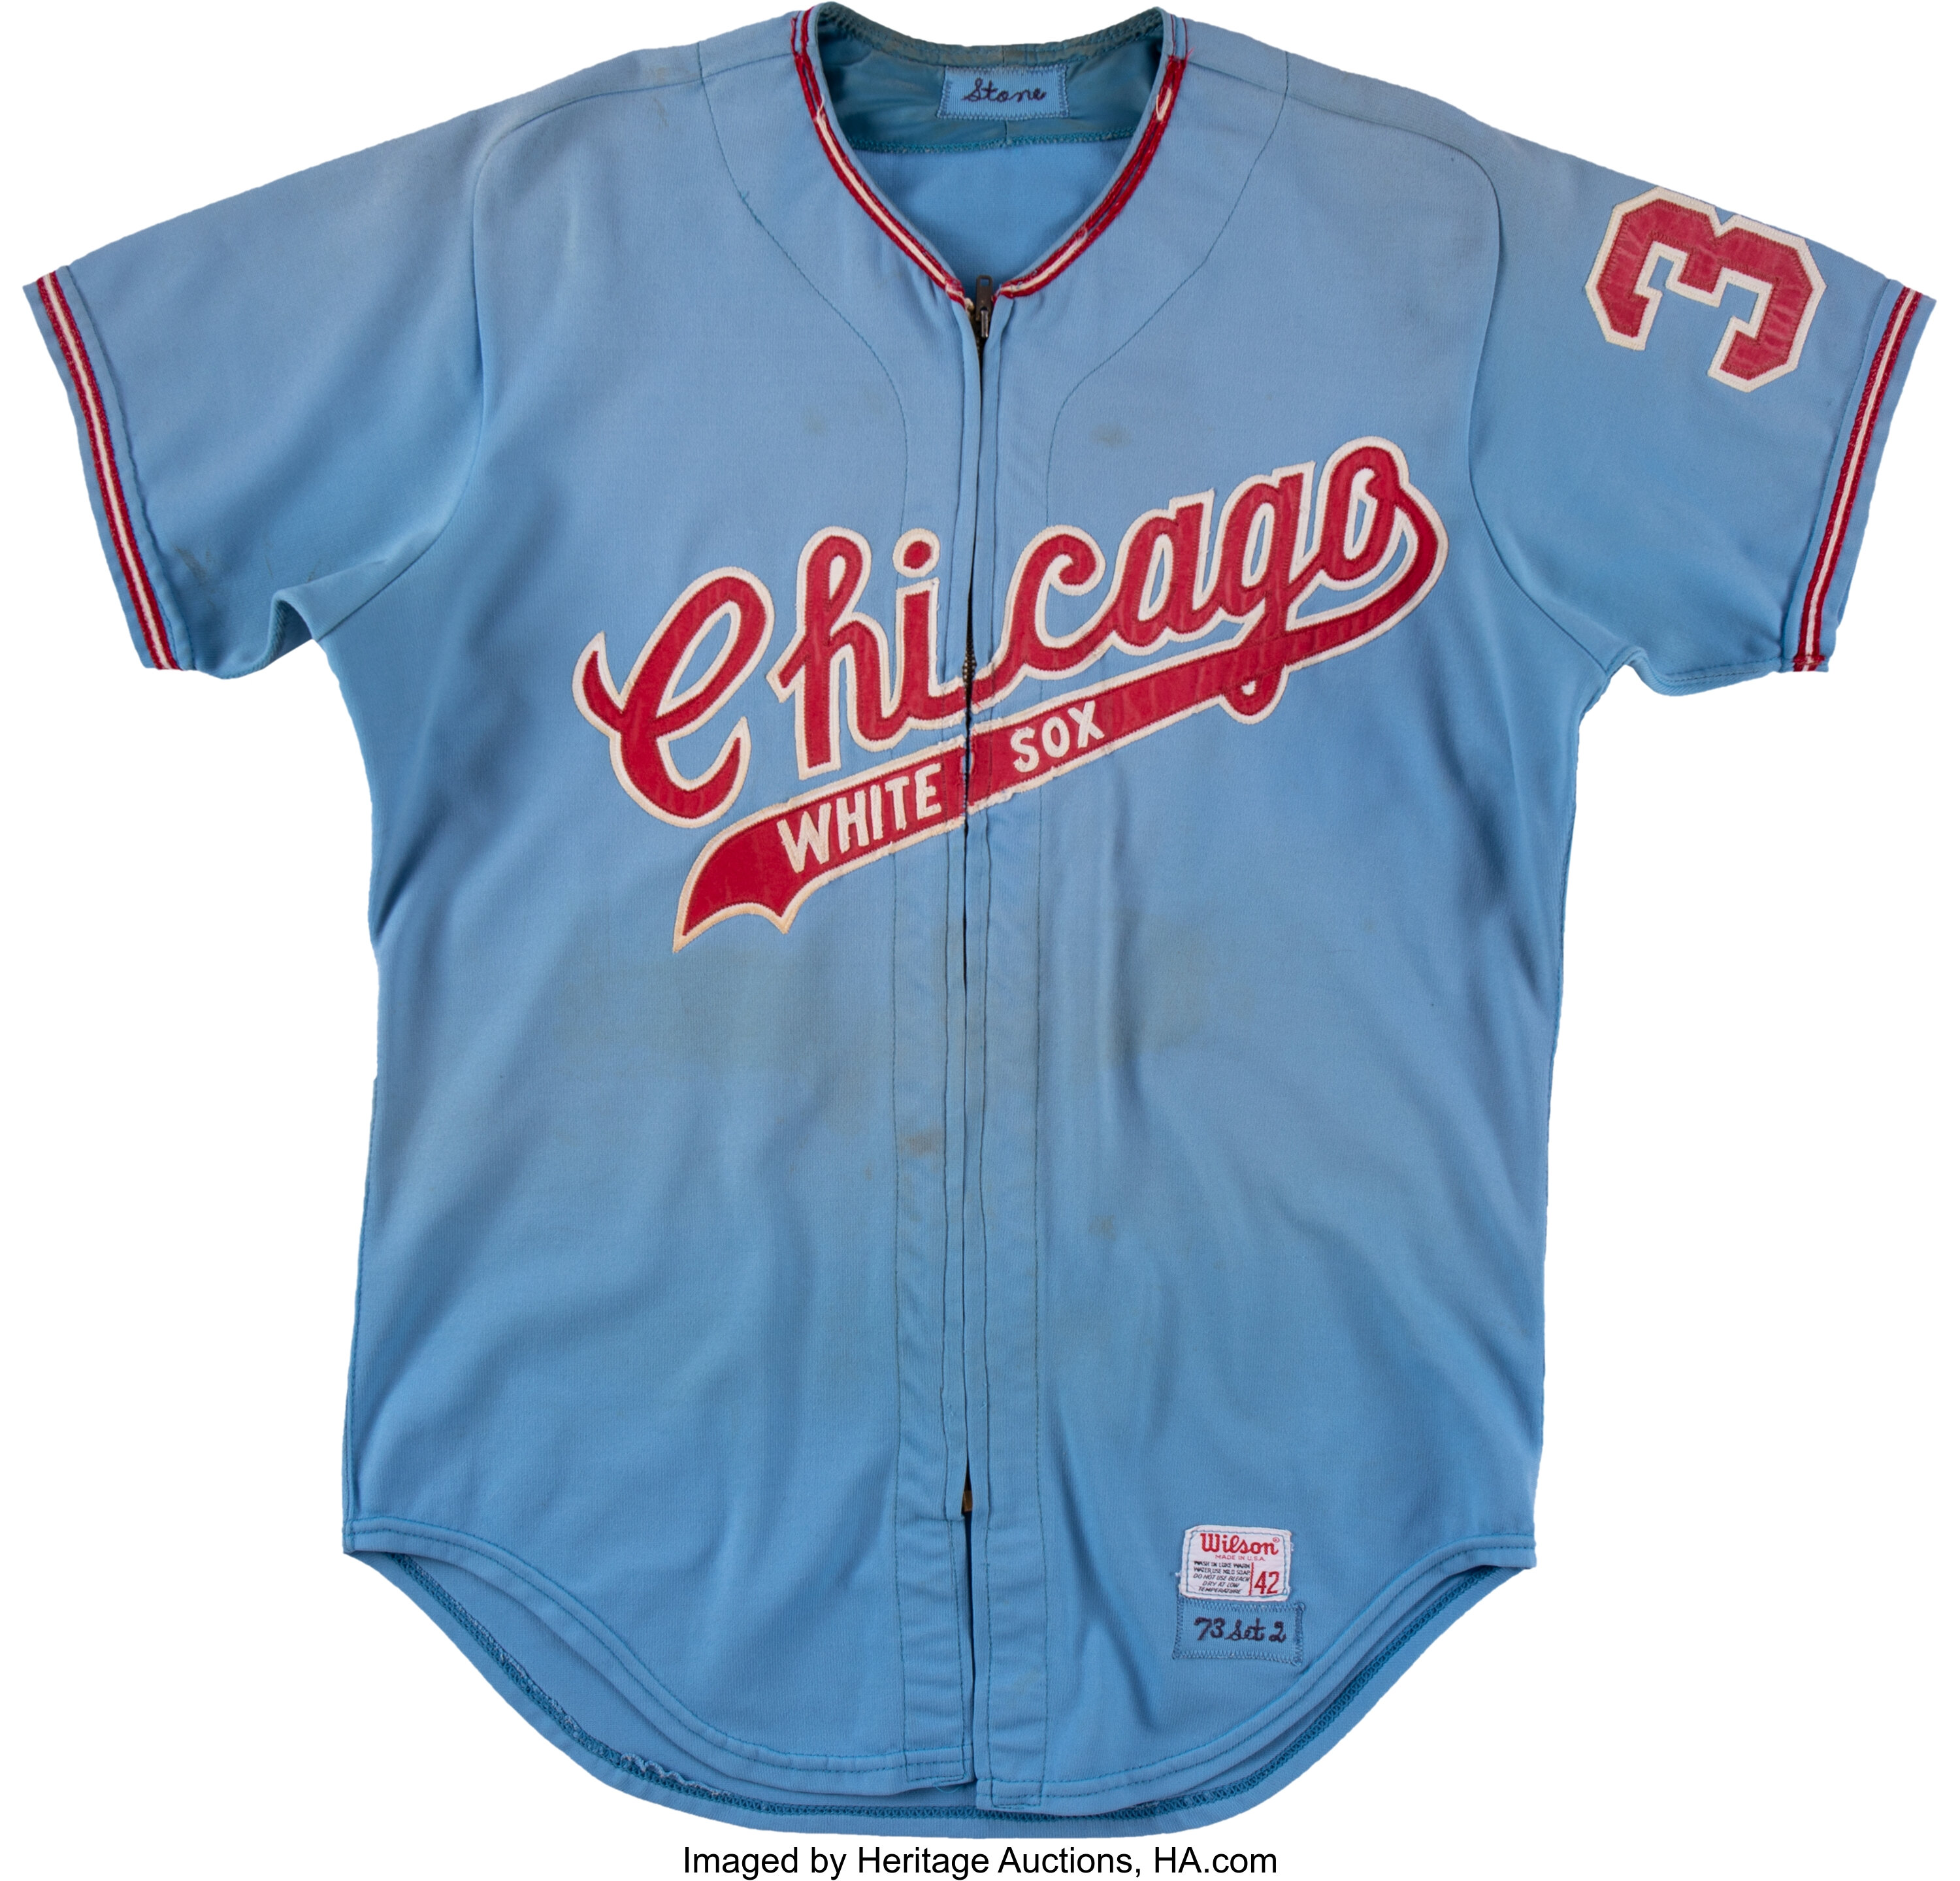 Chicago White Sox Jerseys, White Sox Jersey, Chicago White Sox Uniforms